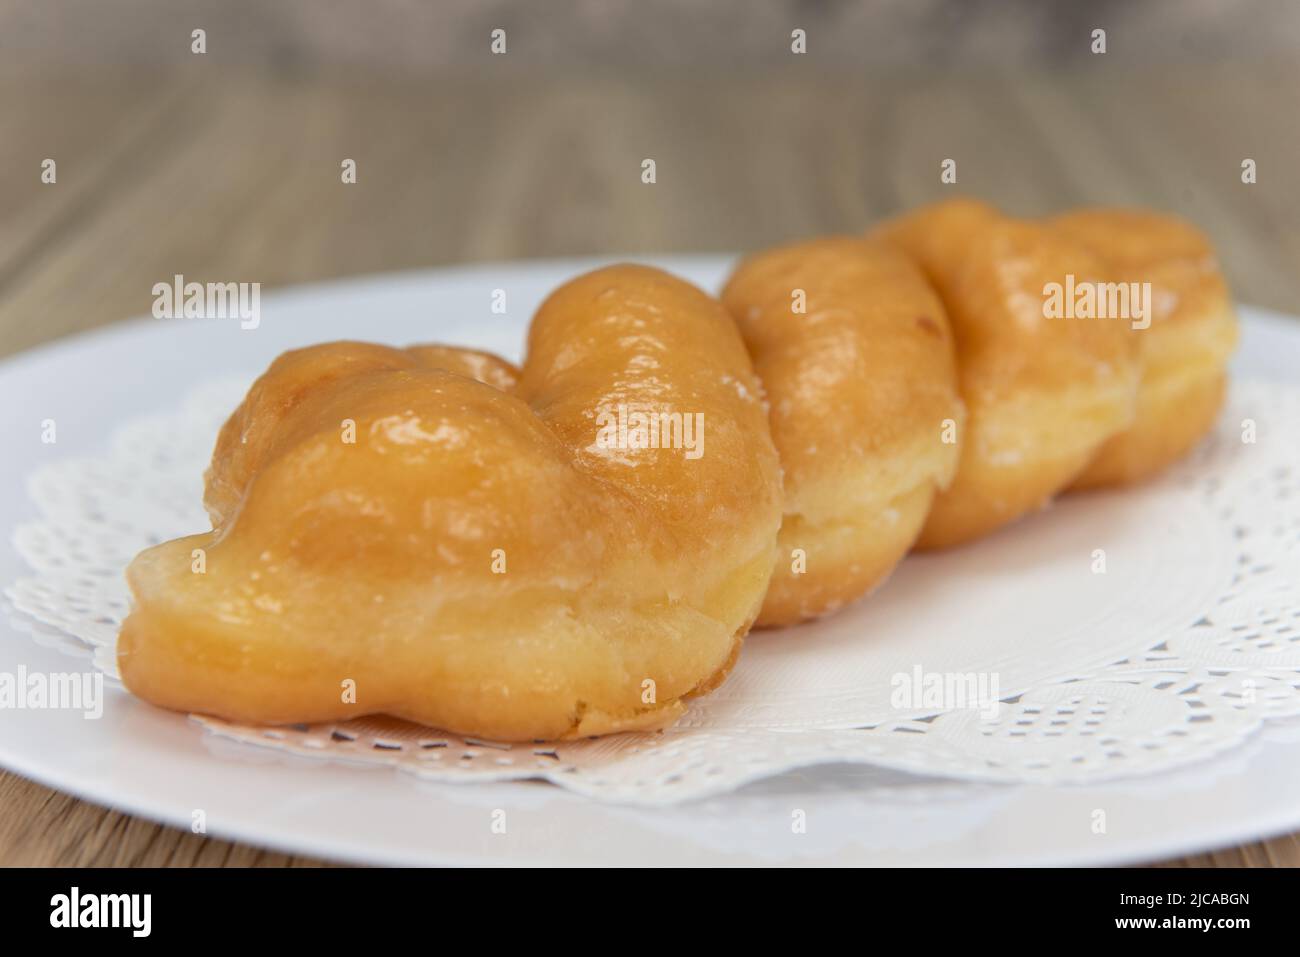 Tempting fresh from the oven glazed twist donut from the bakery served on a plate. Stock Photo